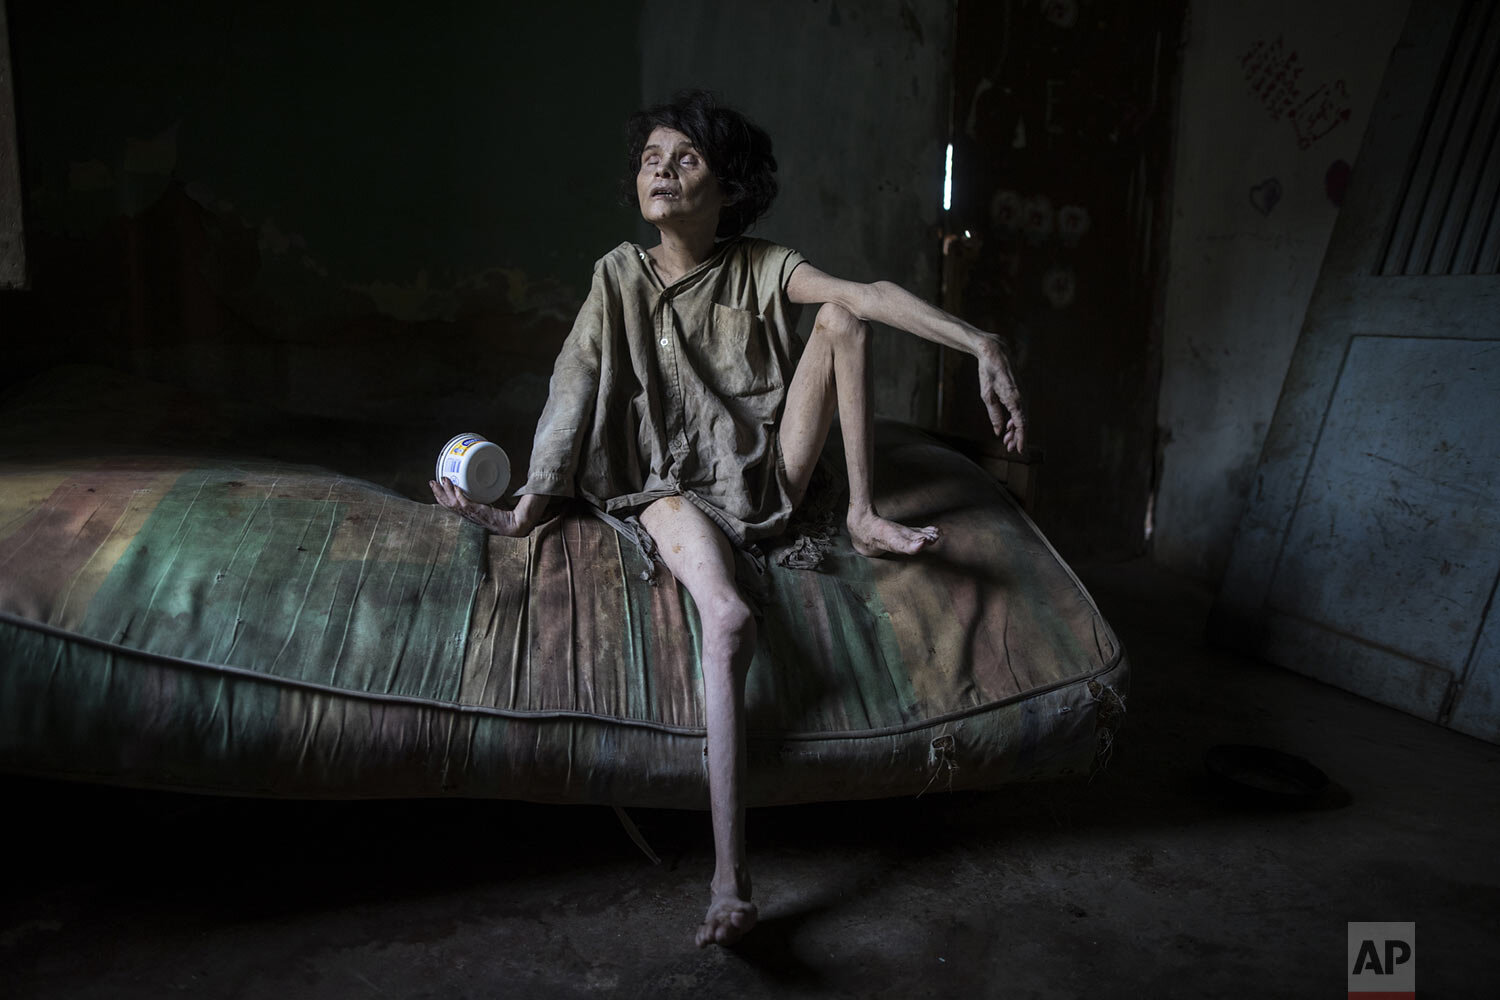  In this photo published in December, Zaida Bravo, who suffers Parkinson's disease and is malnourished, waits for dinner on her dirty mattress in her one room living quarters in Maracaibo, Venezuela, Nov. 28, 2019. The 48-year-old's sister Ana Bravo 